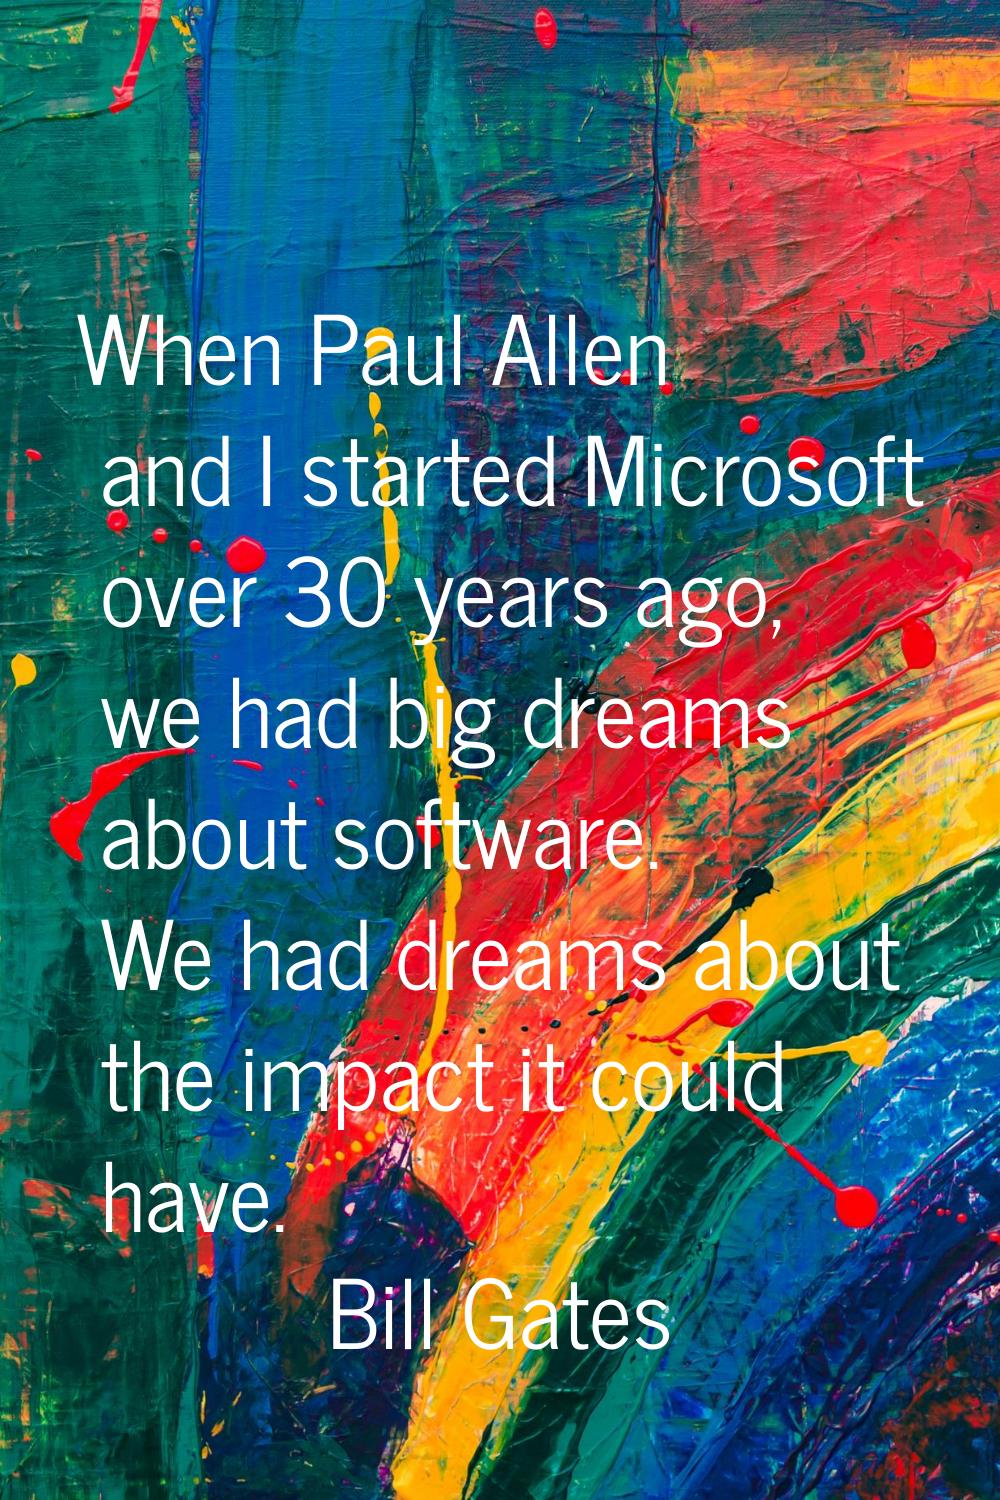 When Paul Allen and I started Microsoft over 30 years ago, we had big dreams about software. We had